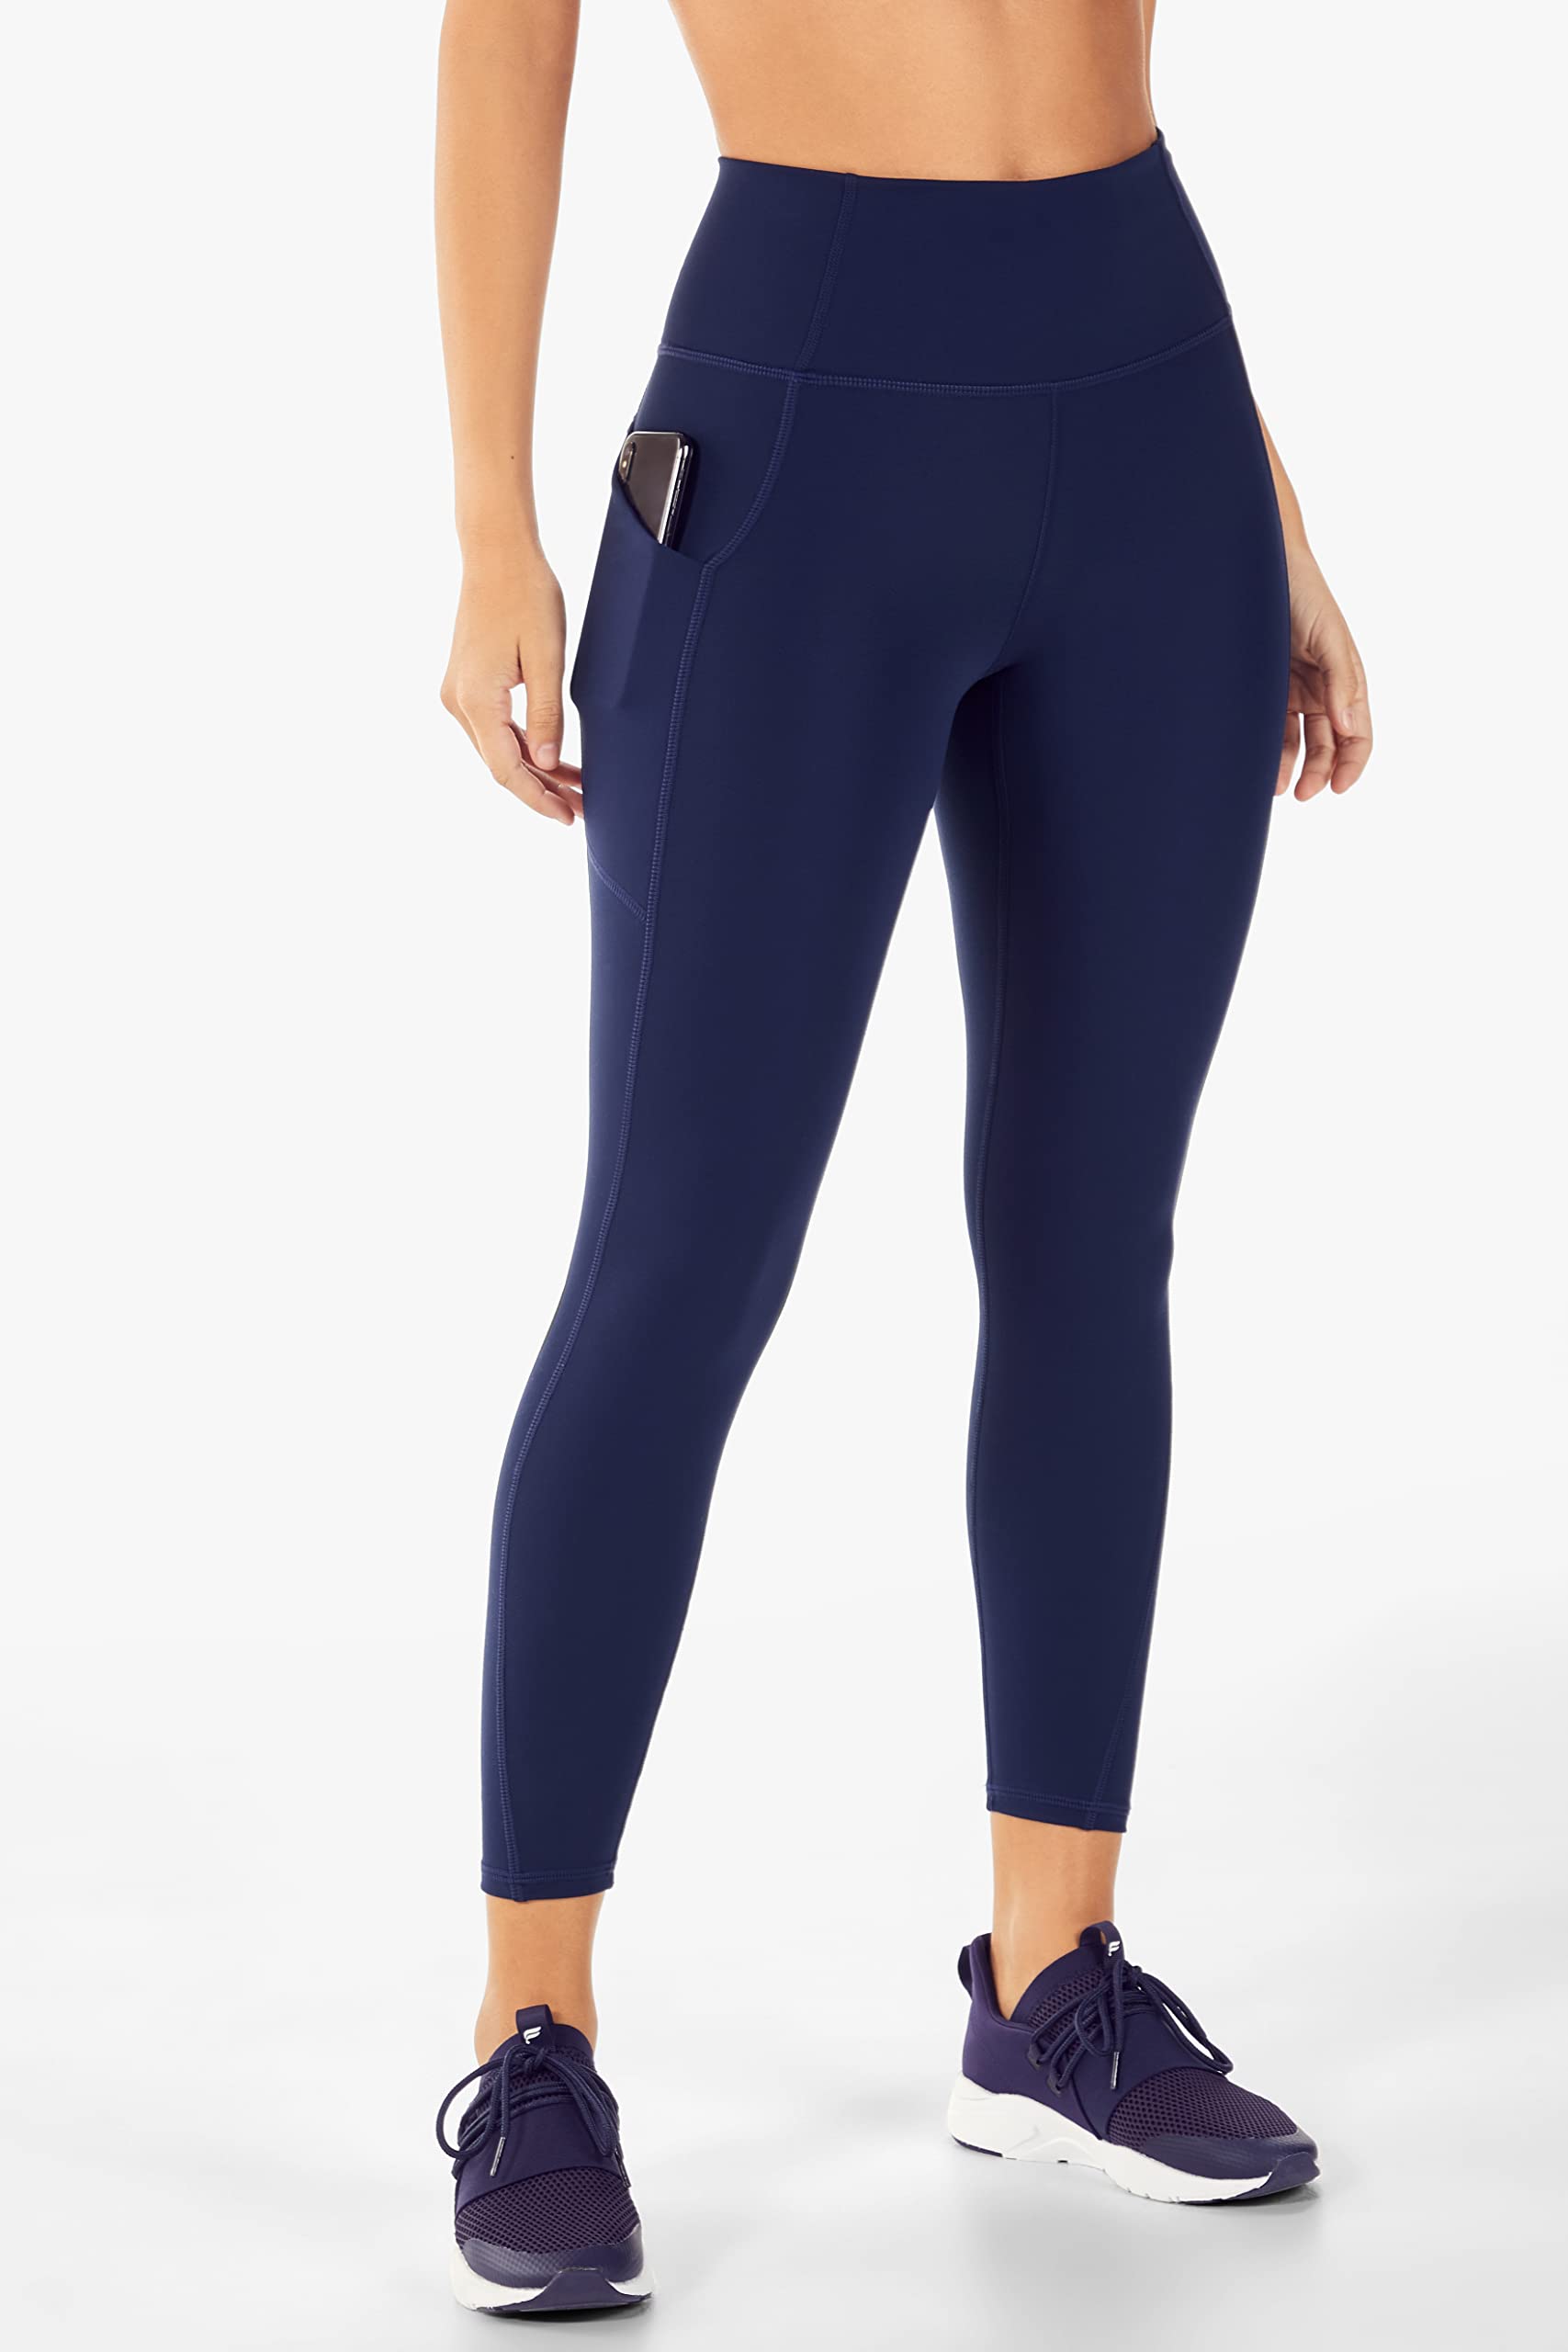  Fabletics Womens Oasis PureLuxe High-Waisted Twist